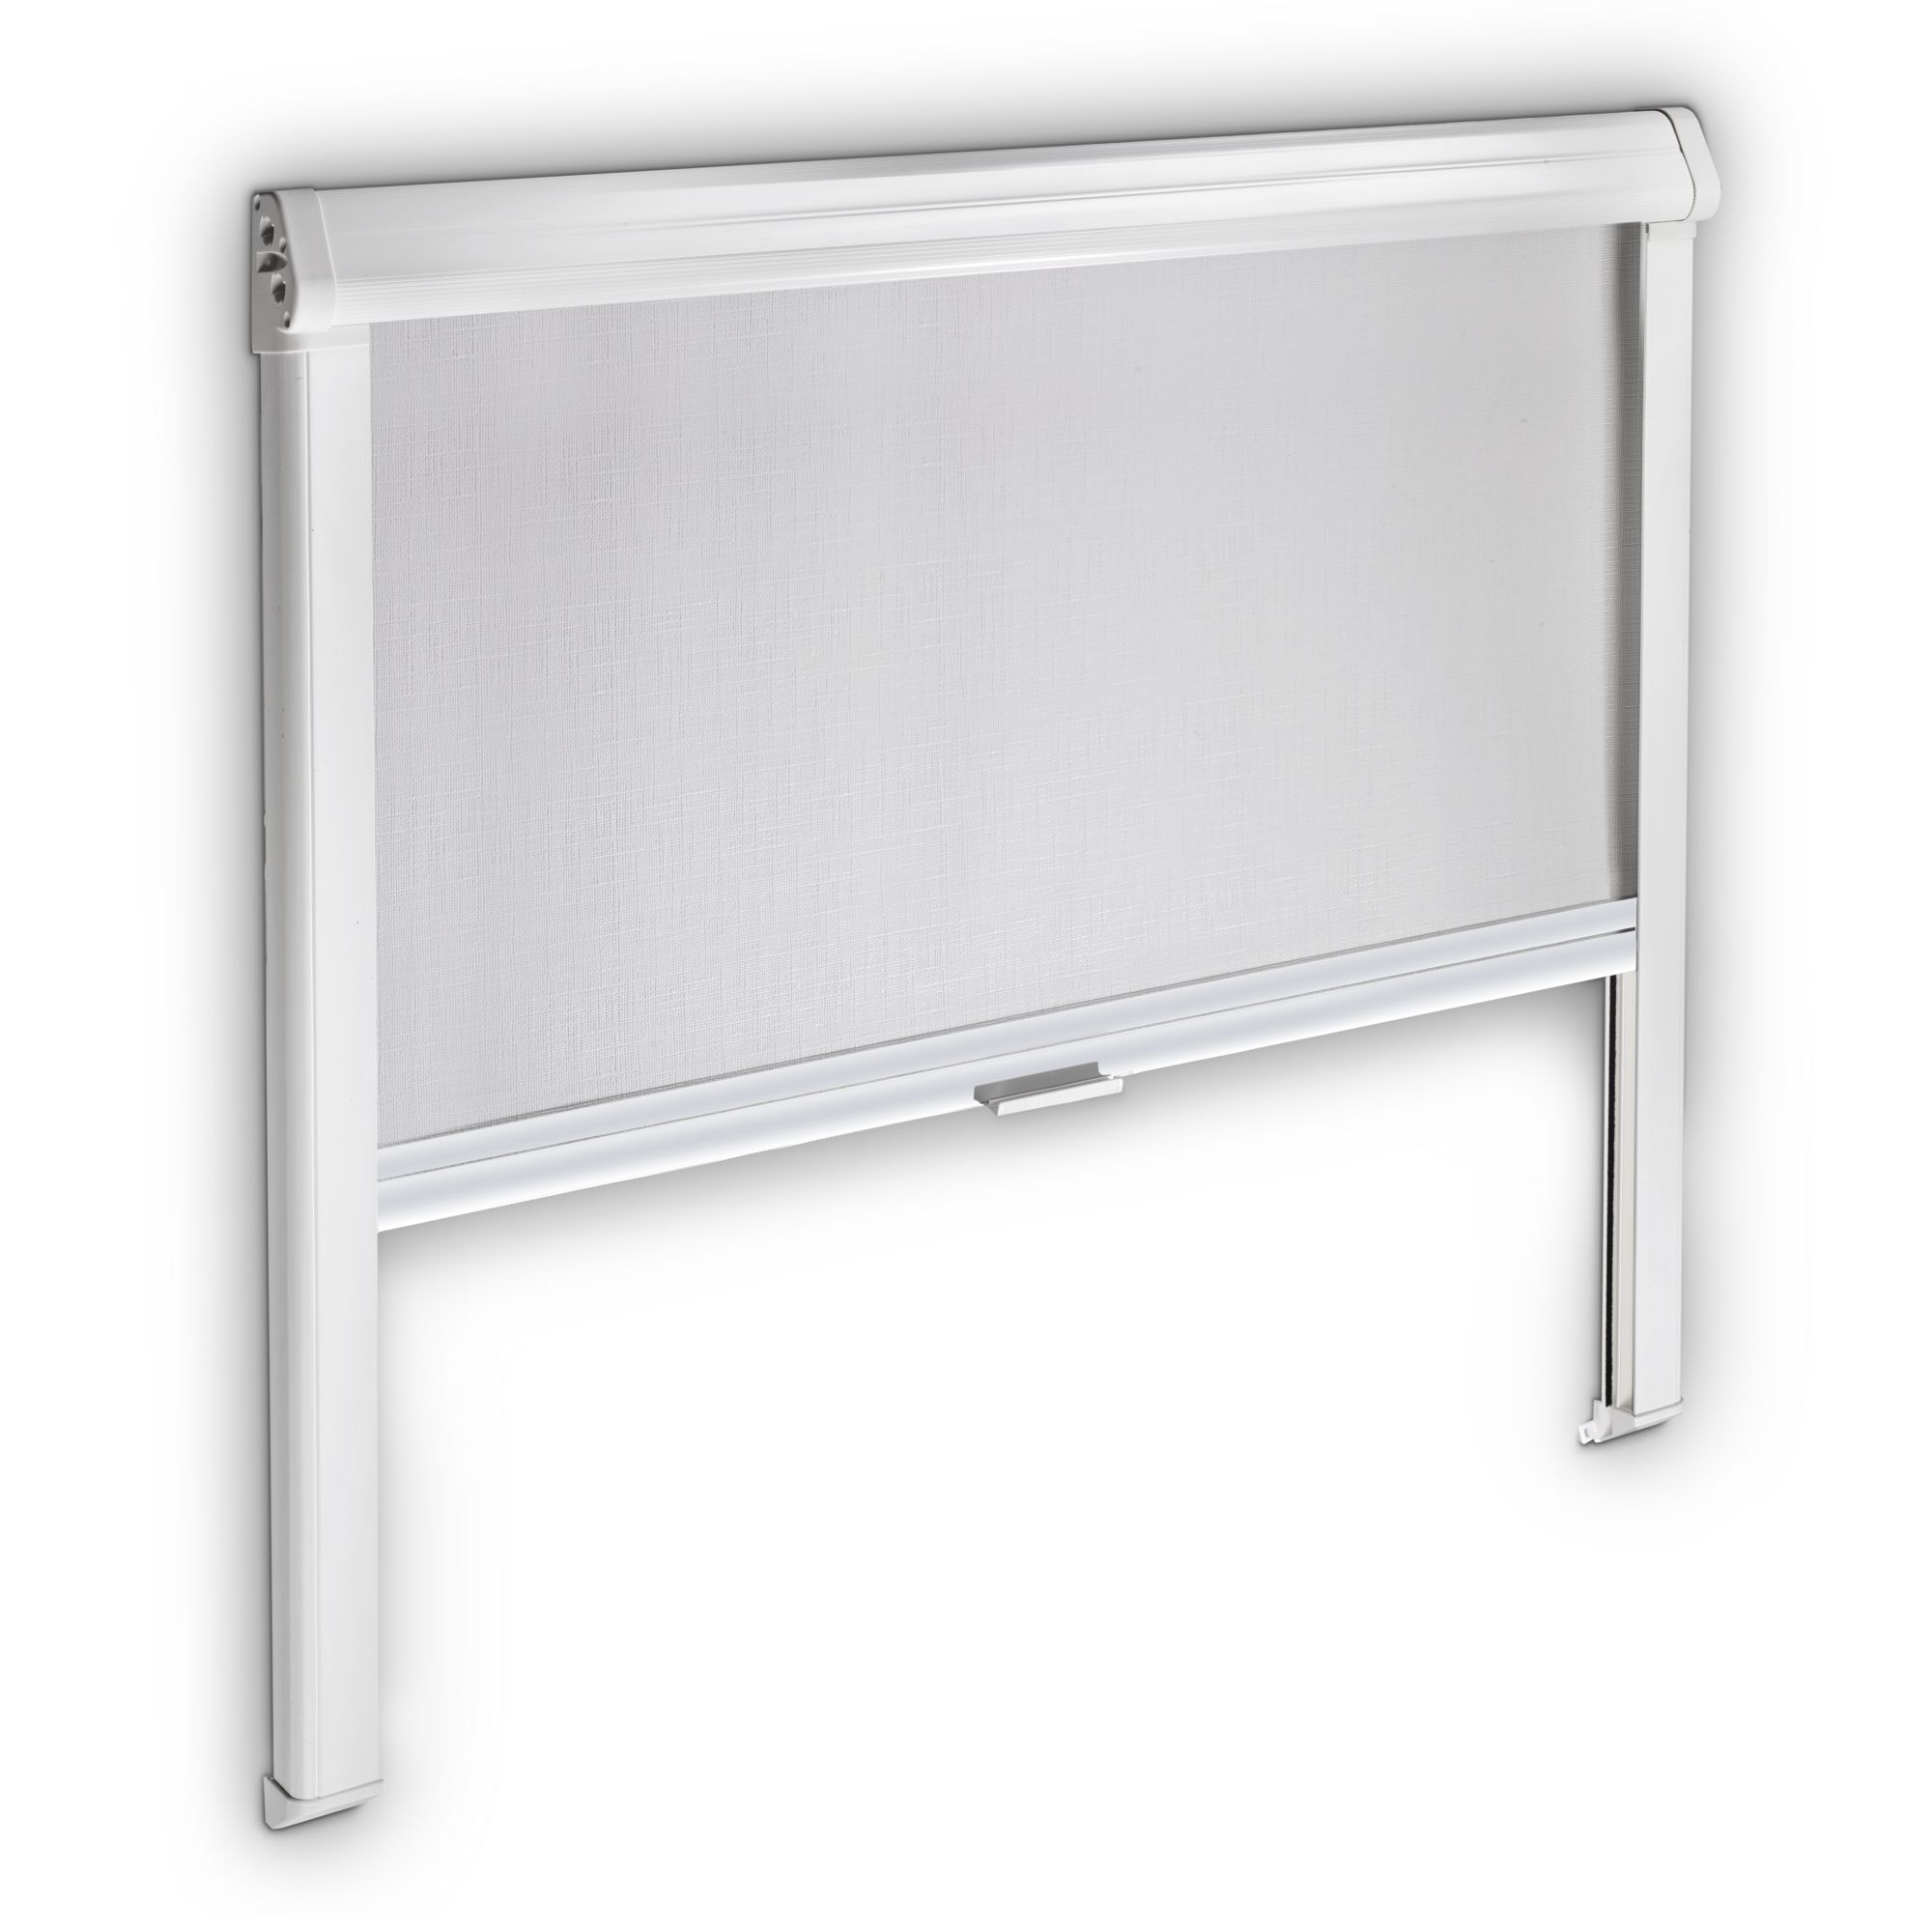 Dometic Black-Out Roller Blind 3000, 1660 x 810 mm, grey-white